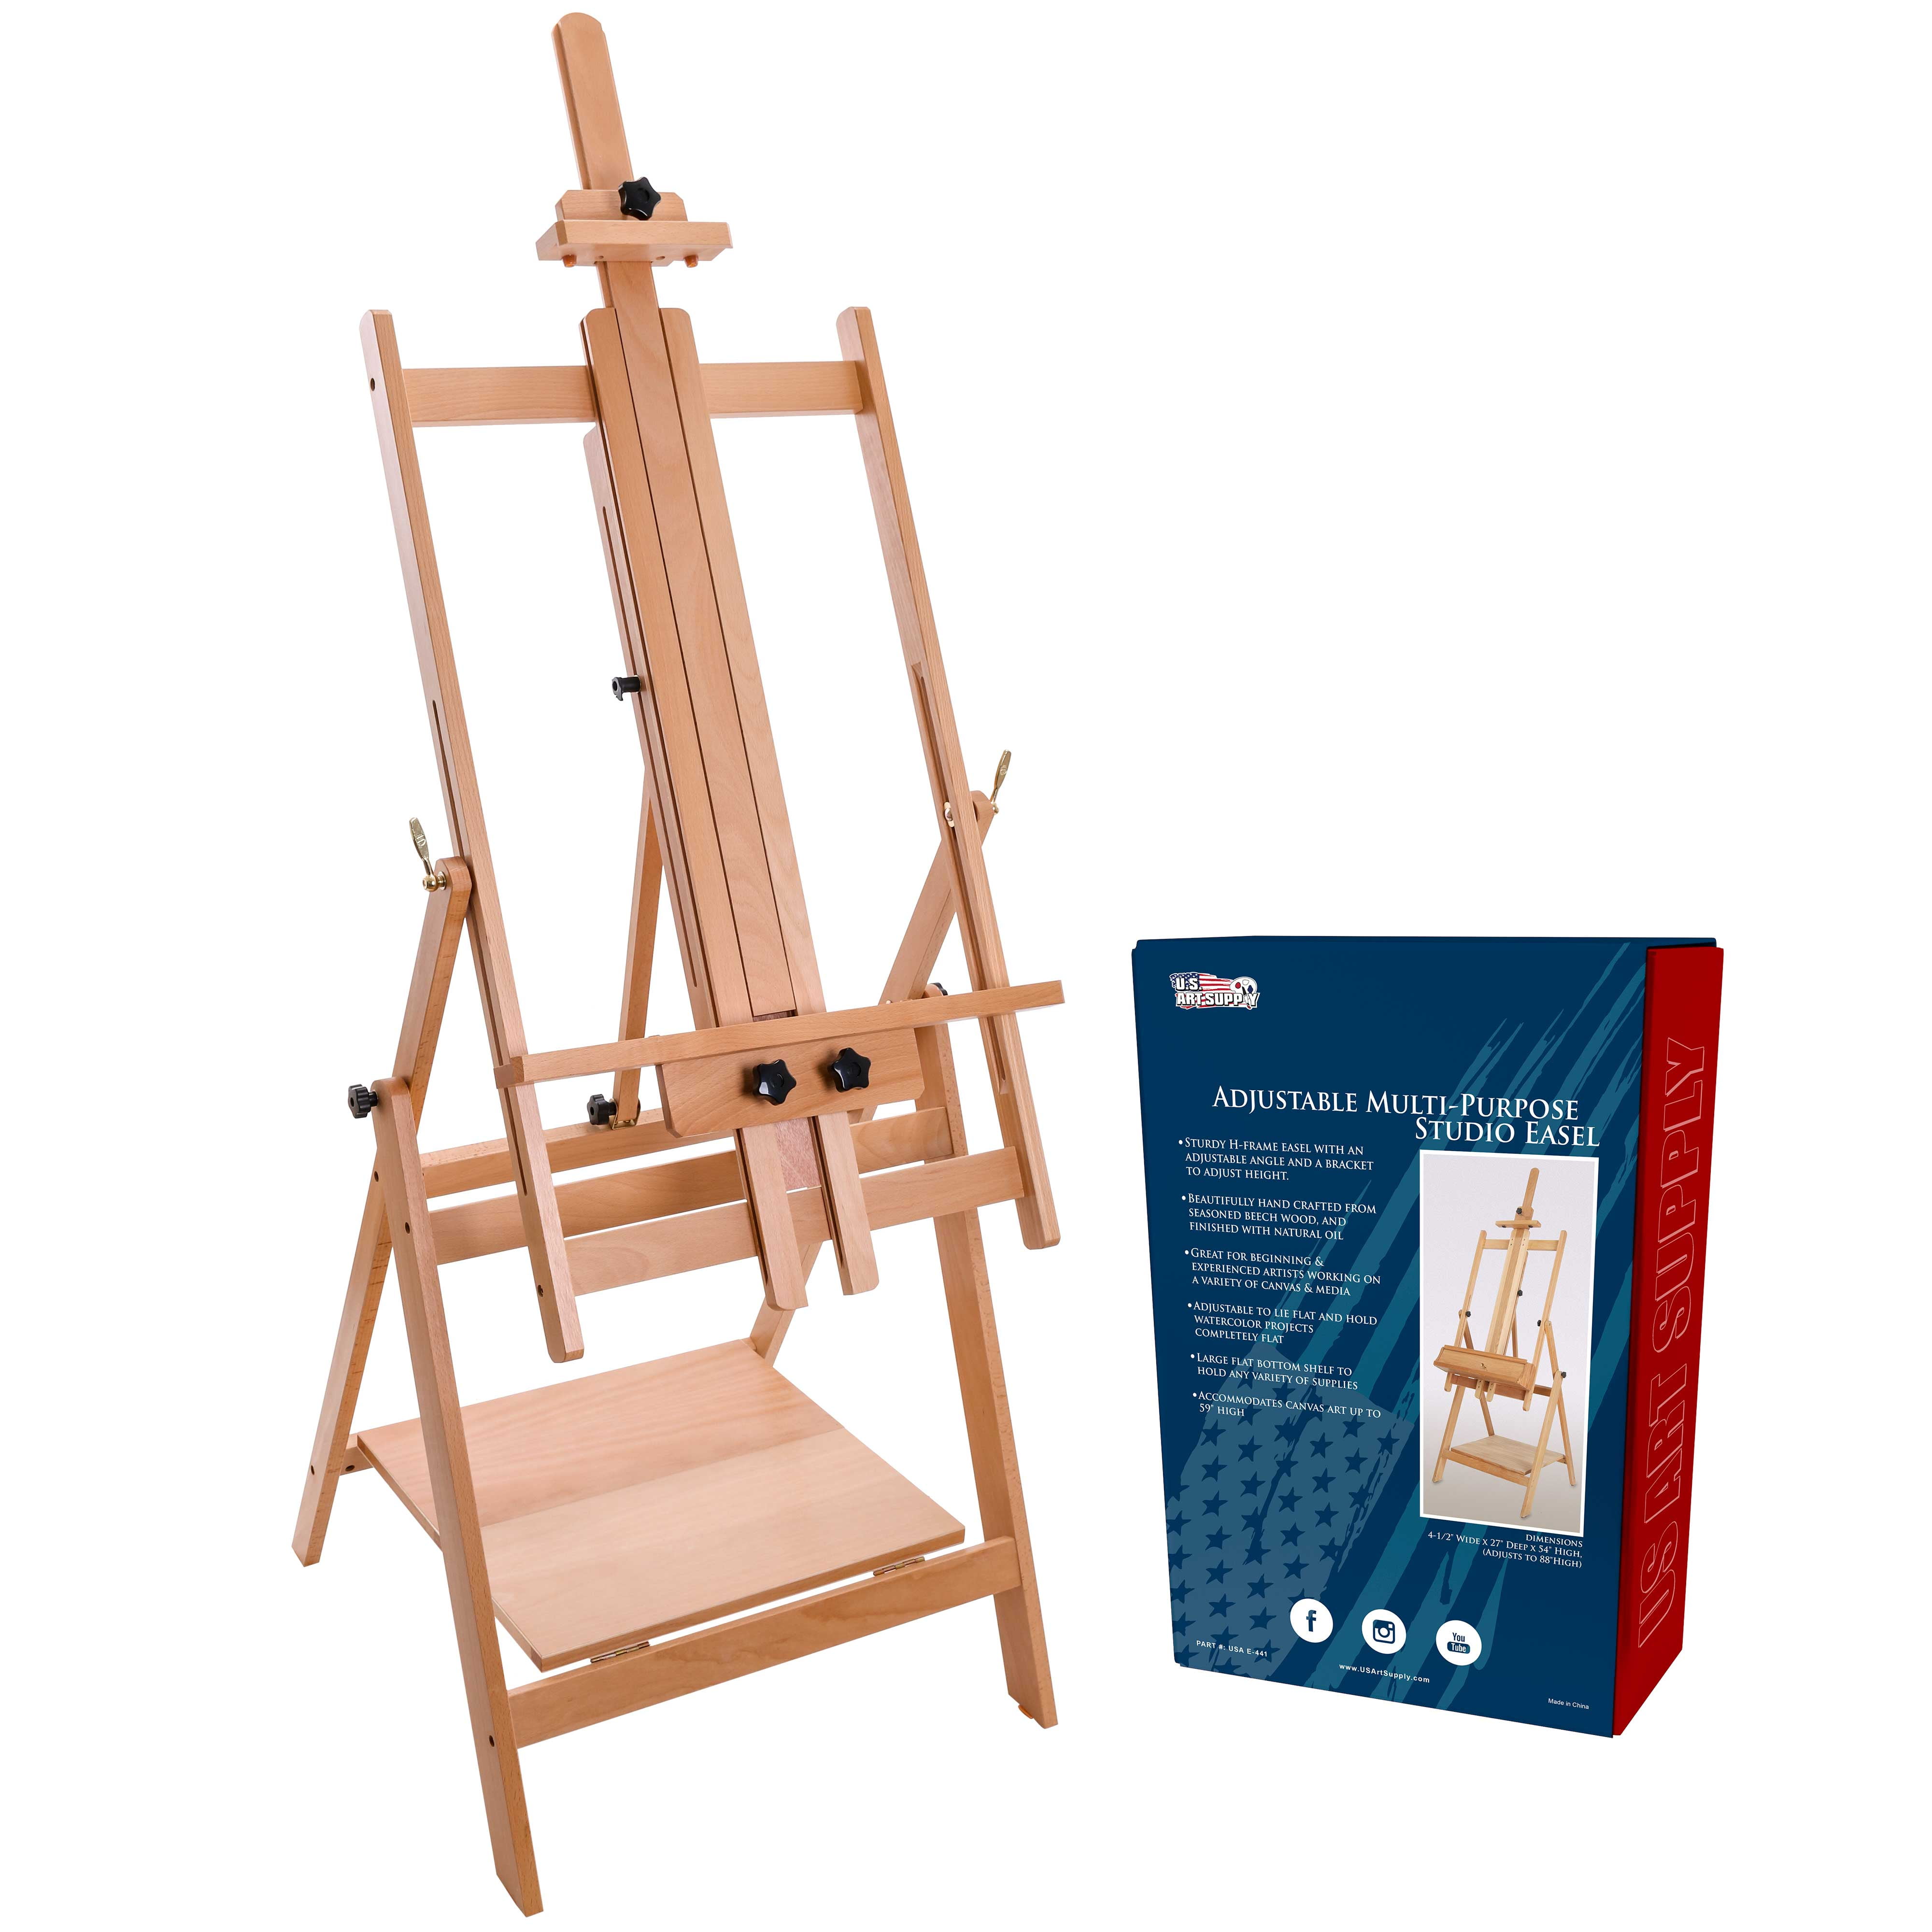 MEEDEN Tabletop Easel for Painting, Wood H-Frame Table Easel, Table Top  Painting Easel for Adults, Beginners, Artists, Holds Canvas up to 23